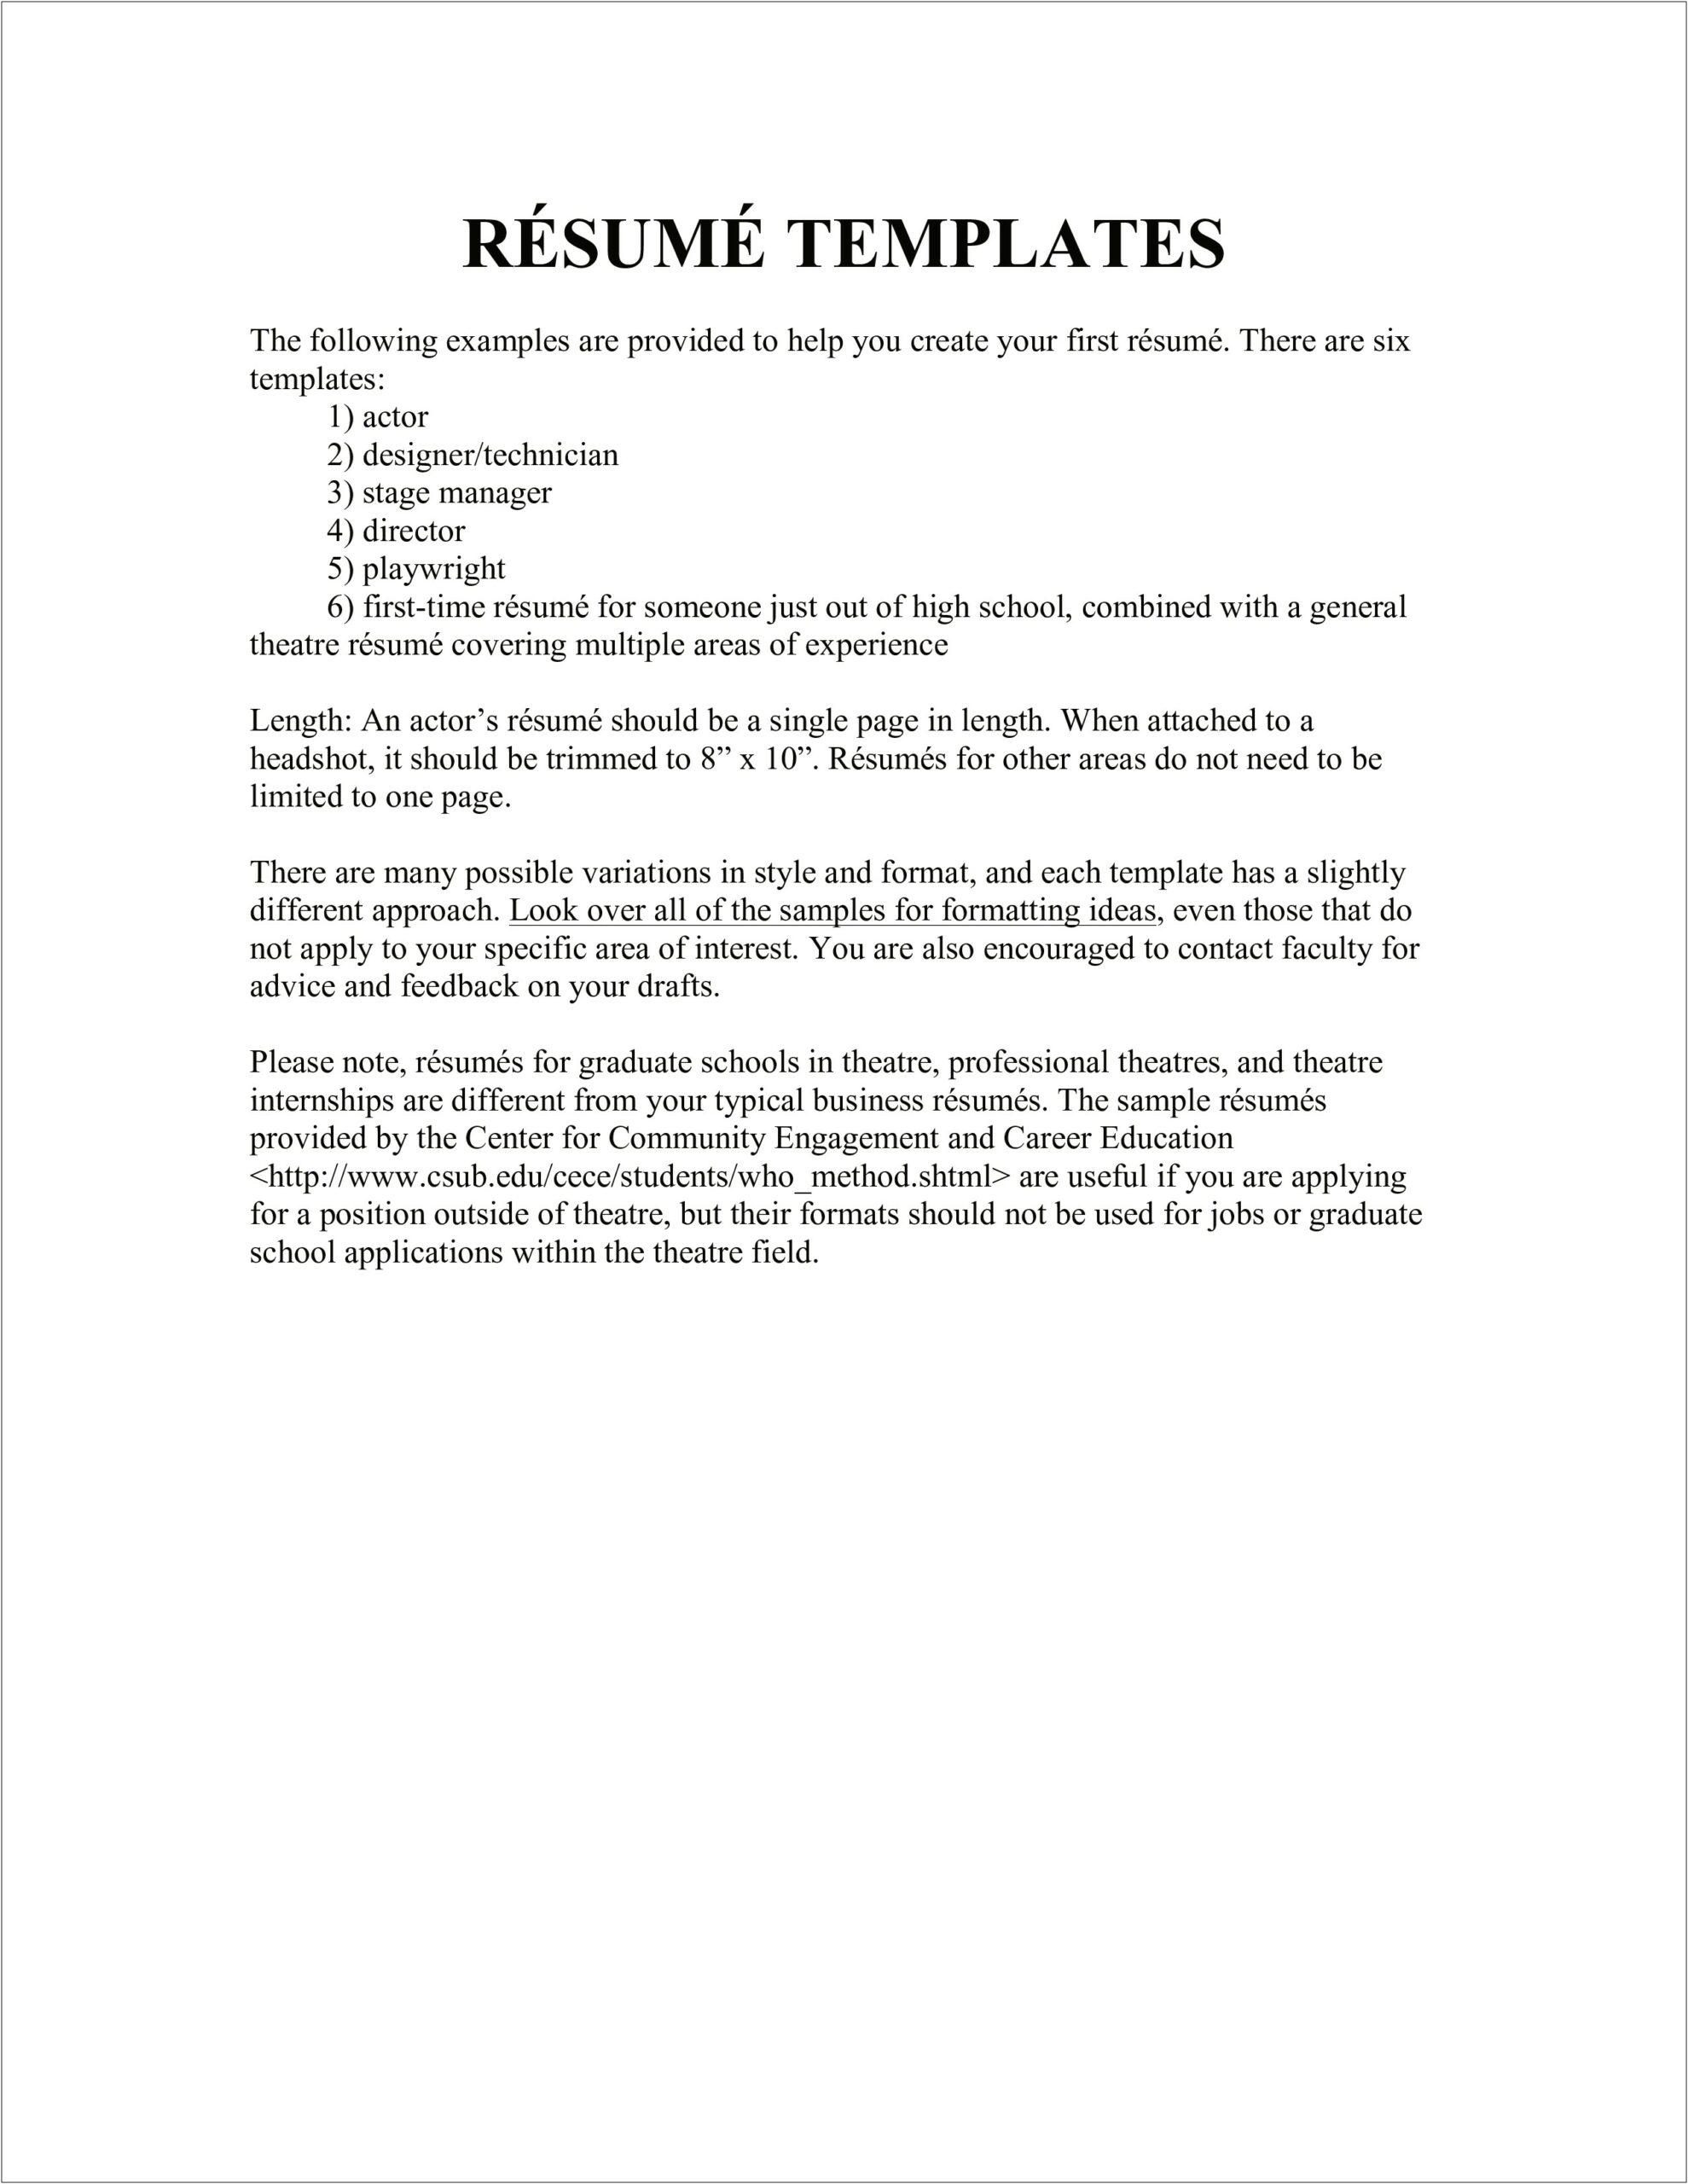 Resume Examples For Theatre House Managers